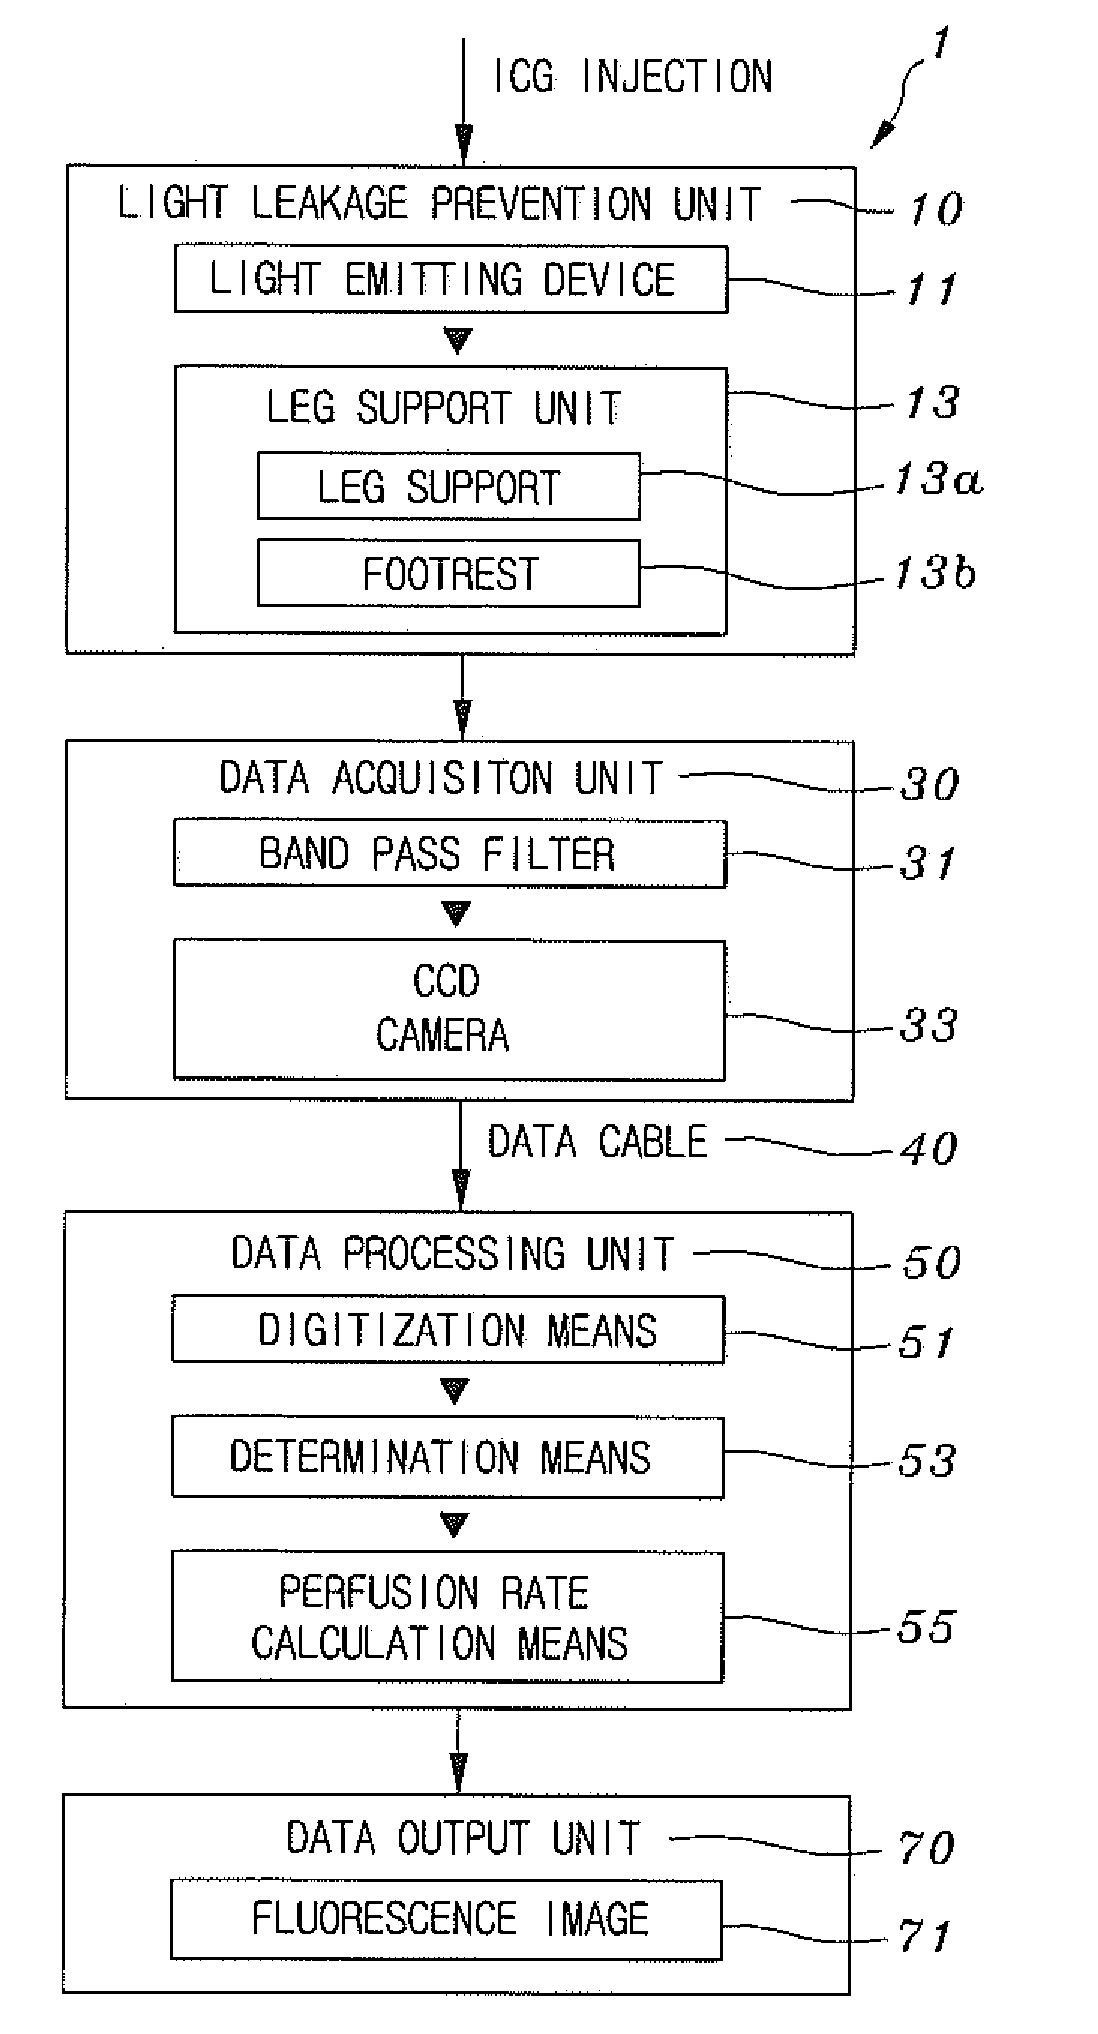 Apparatus for measuring perfusion rate of legs